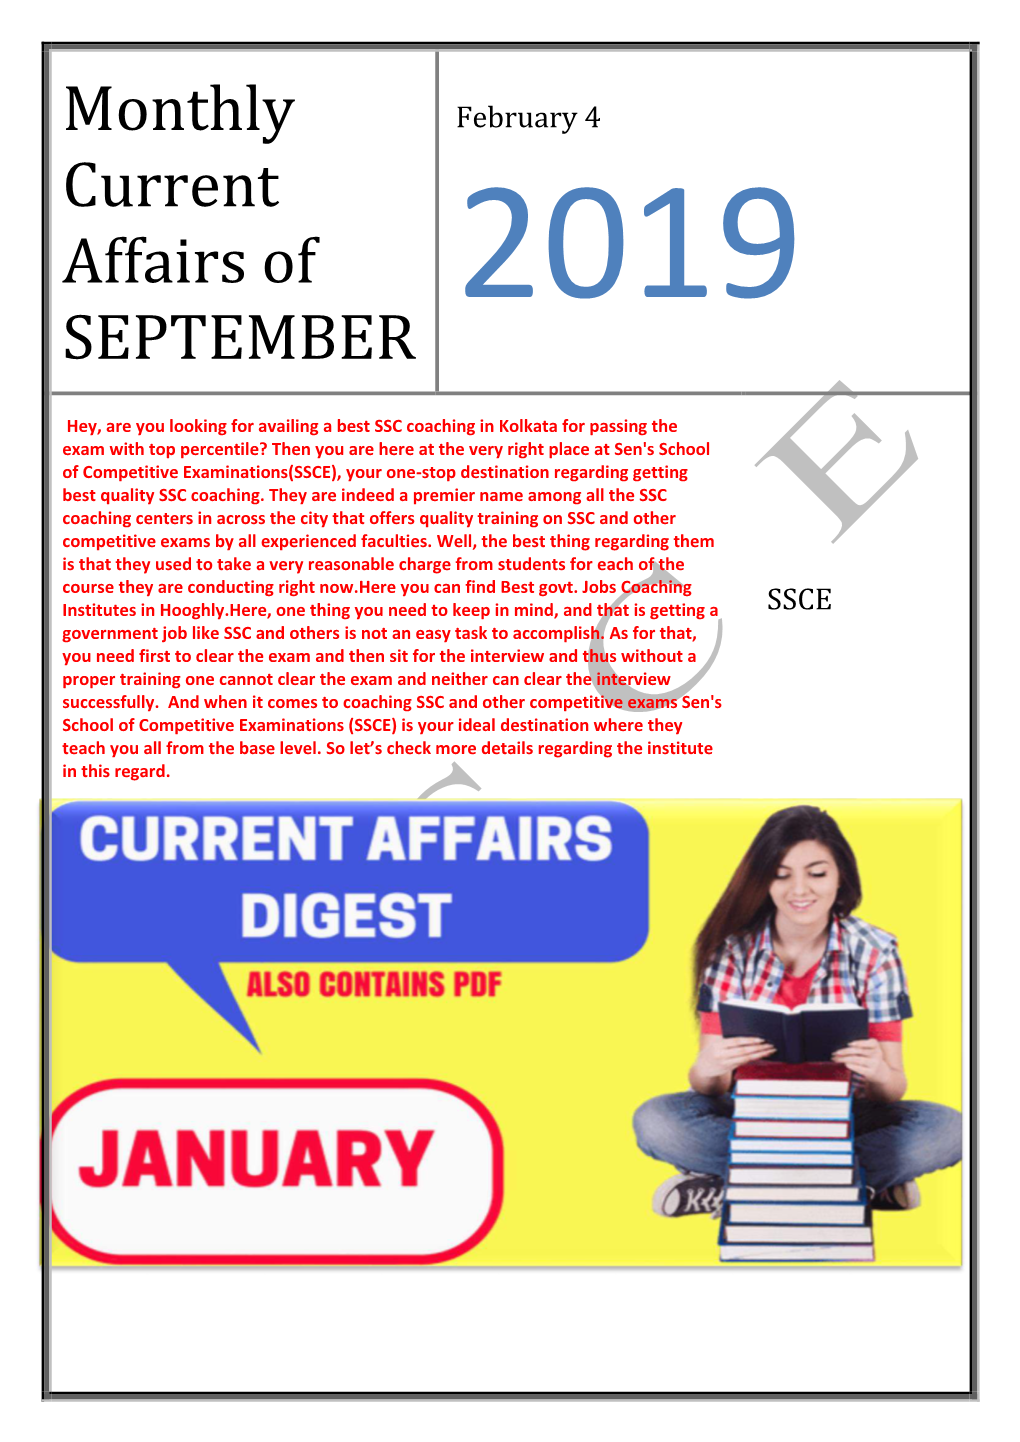 Monthly Current Affairs of SEPTEMBER